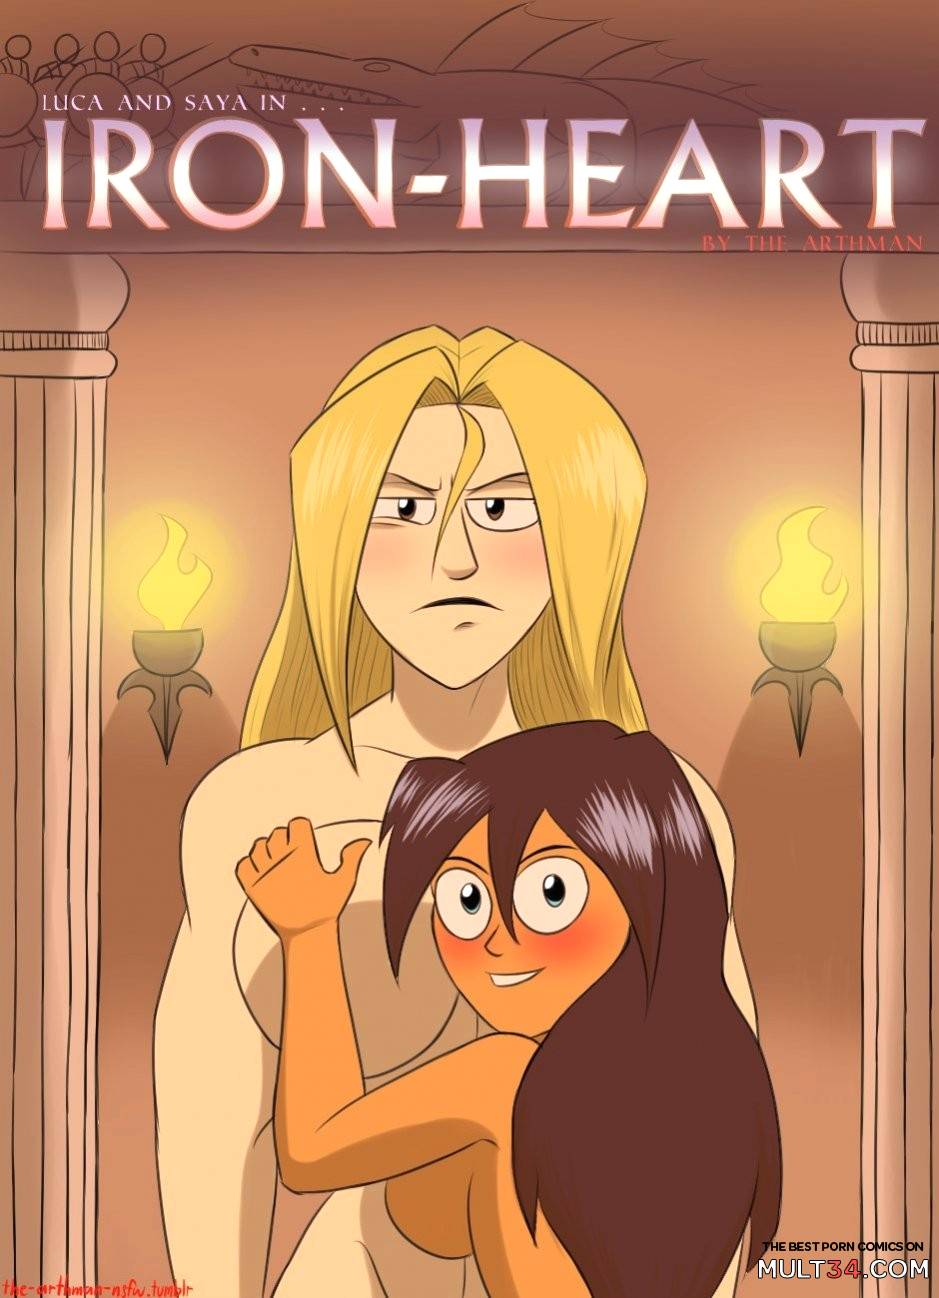 Iron-Heart page 1